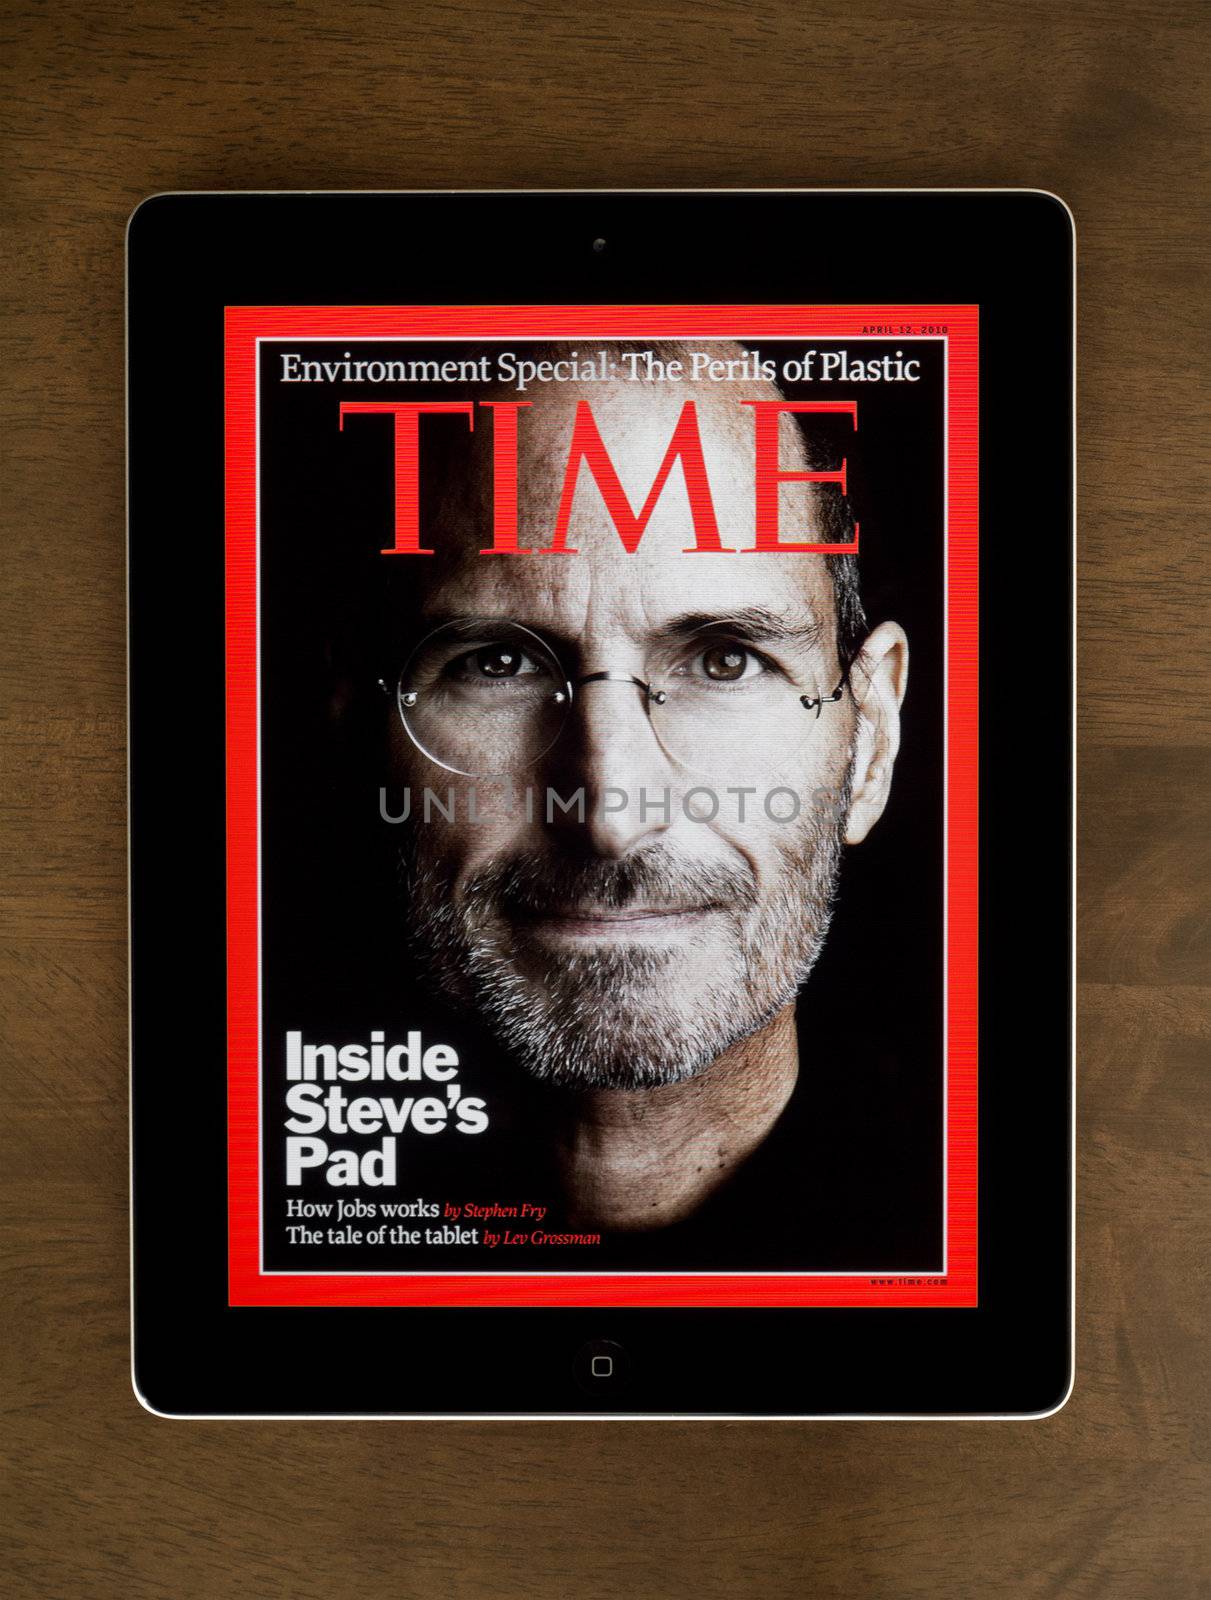 Kiev, Ukraine - October 29, 2011: Steve Jobs, founder of Apple Computers, posted on the cover of Time magazine for April 12, 2007.